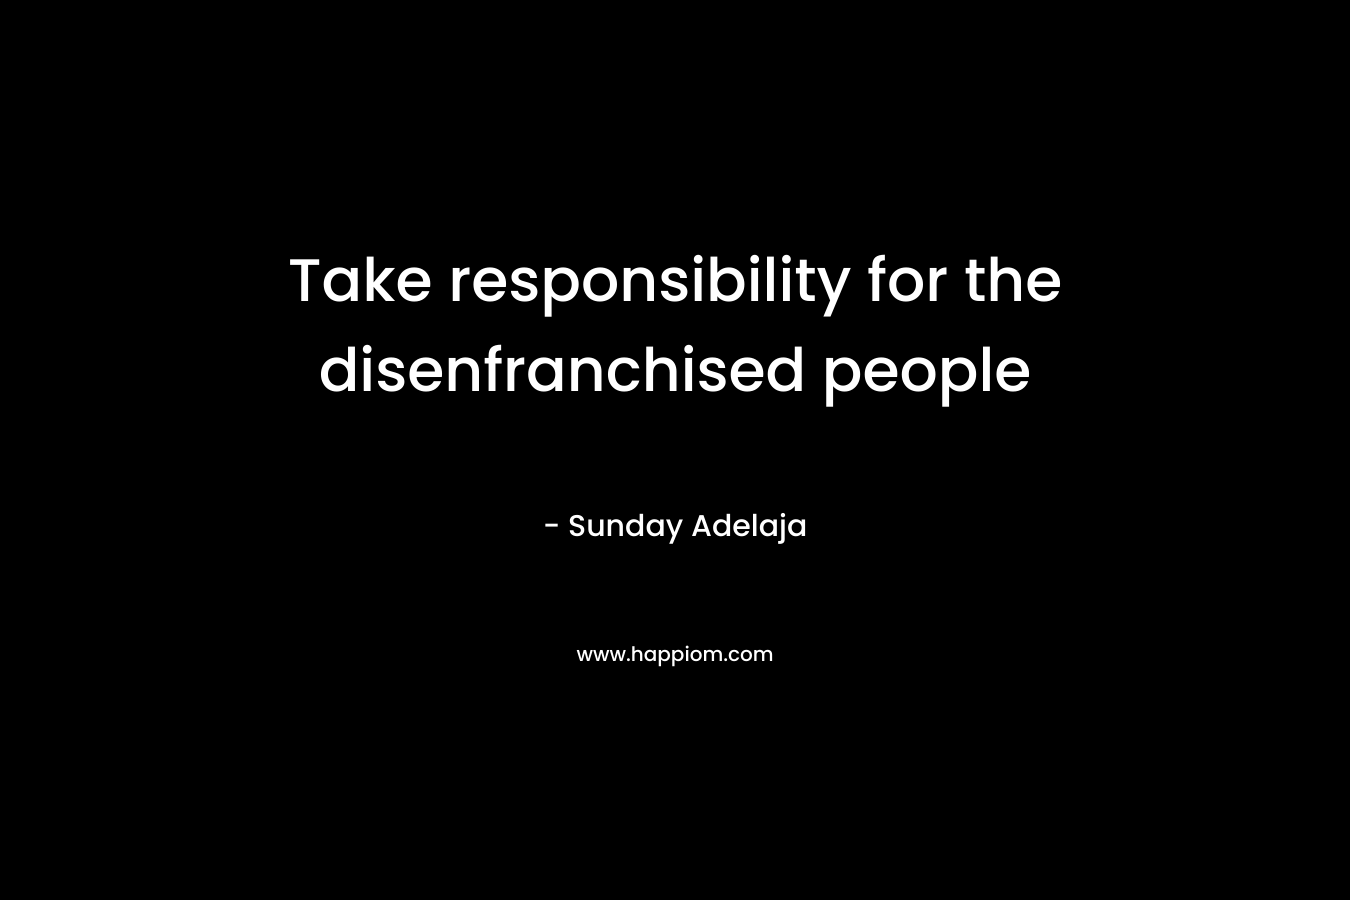 Take responsibility for the disenfranchised people